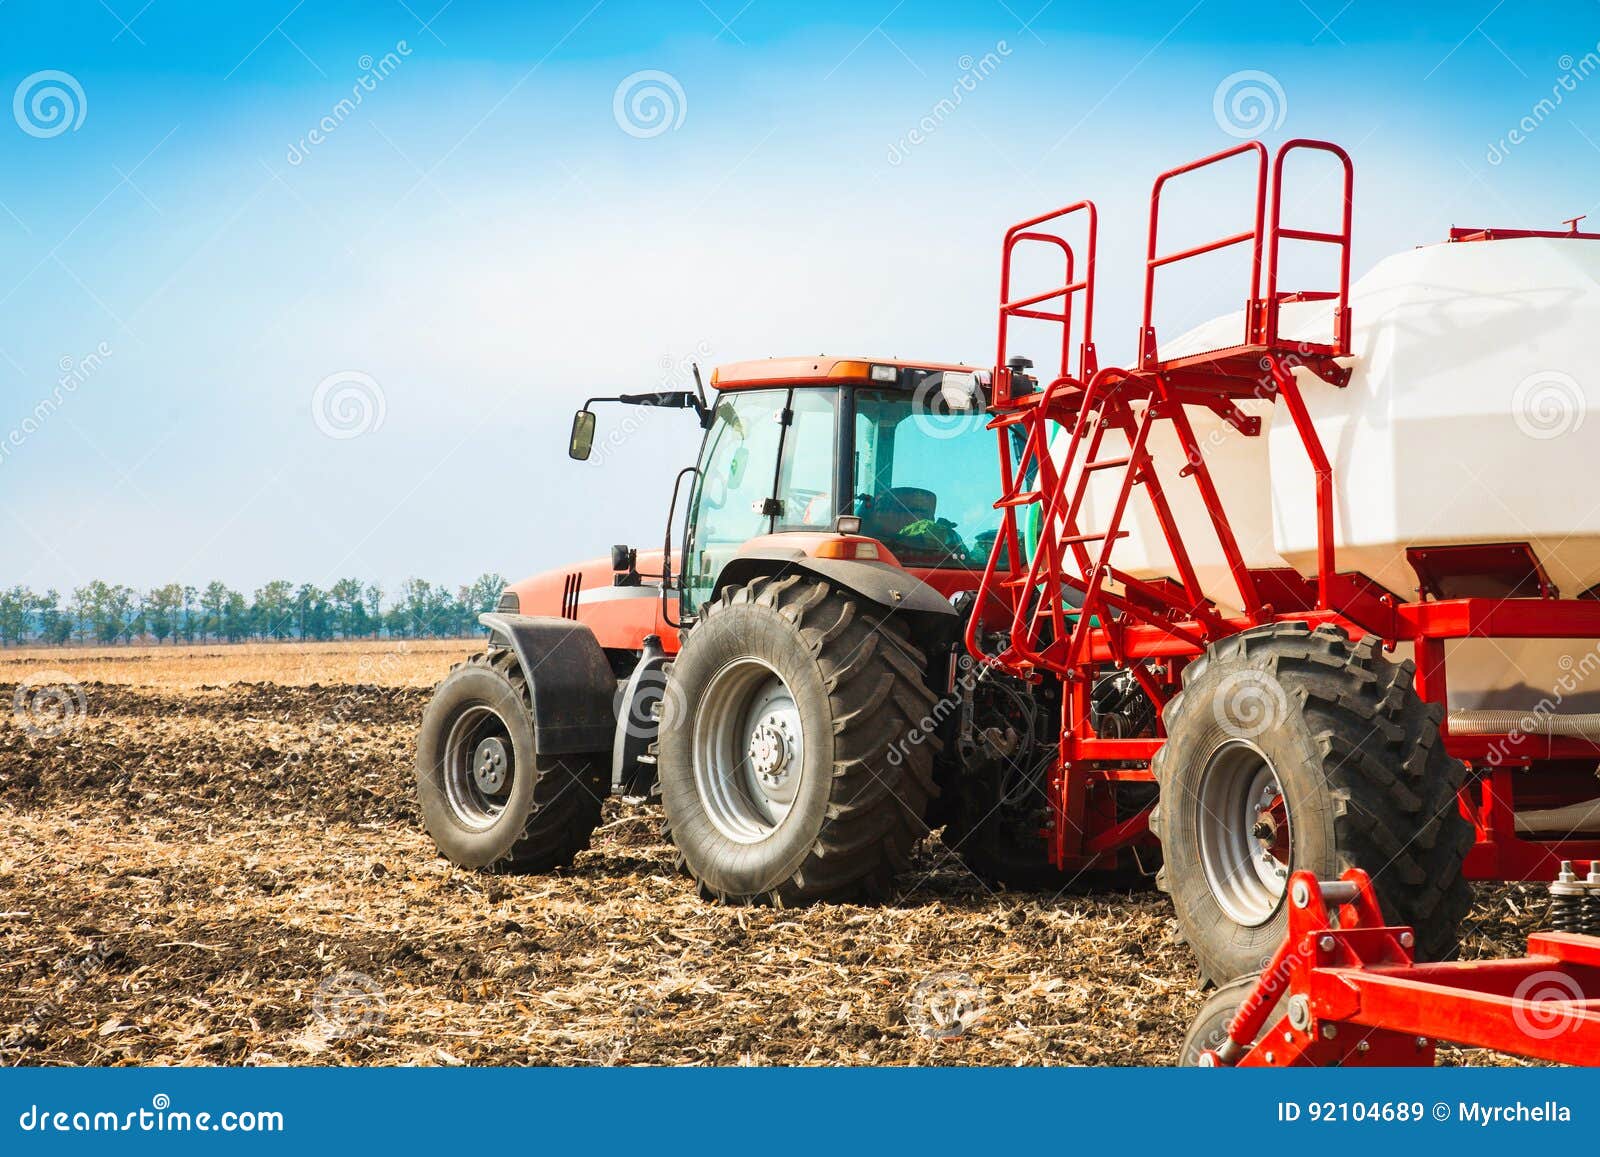 tractor with tanks in the field. agricultural machinery and farming.